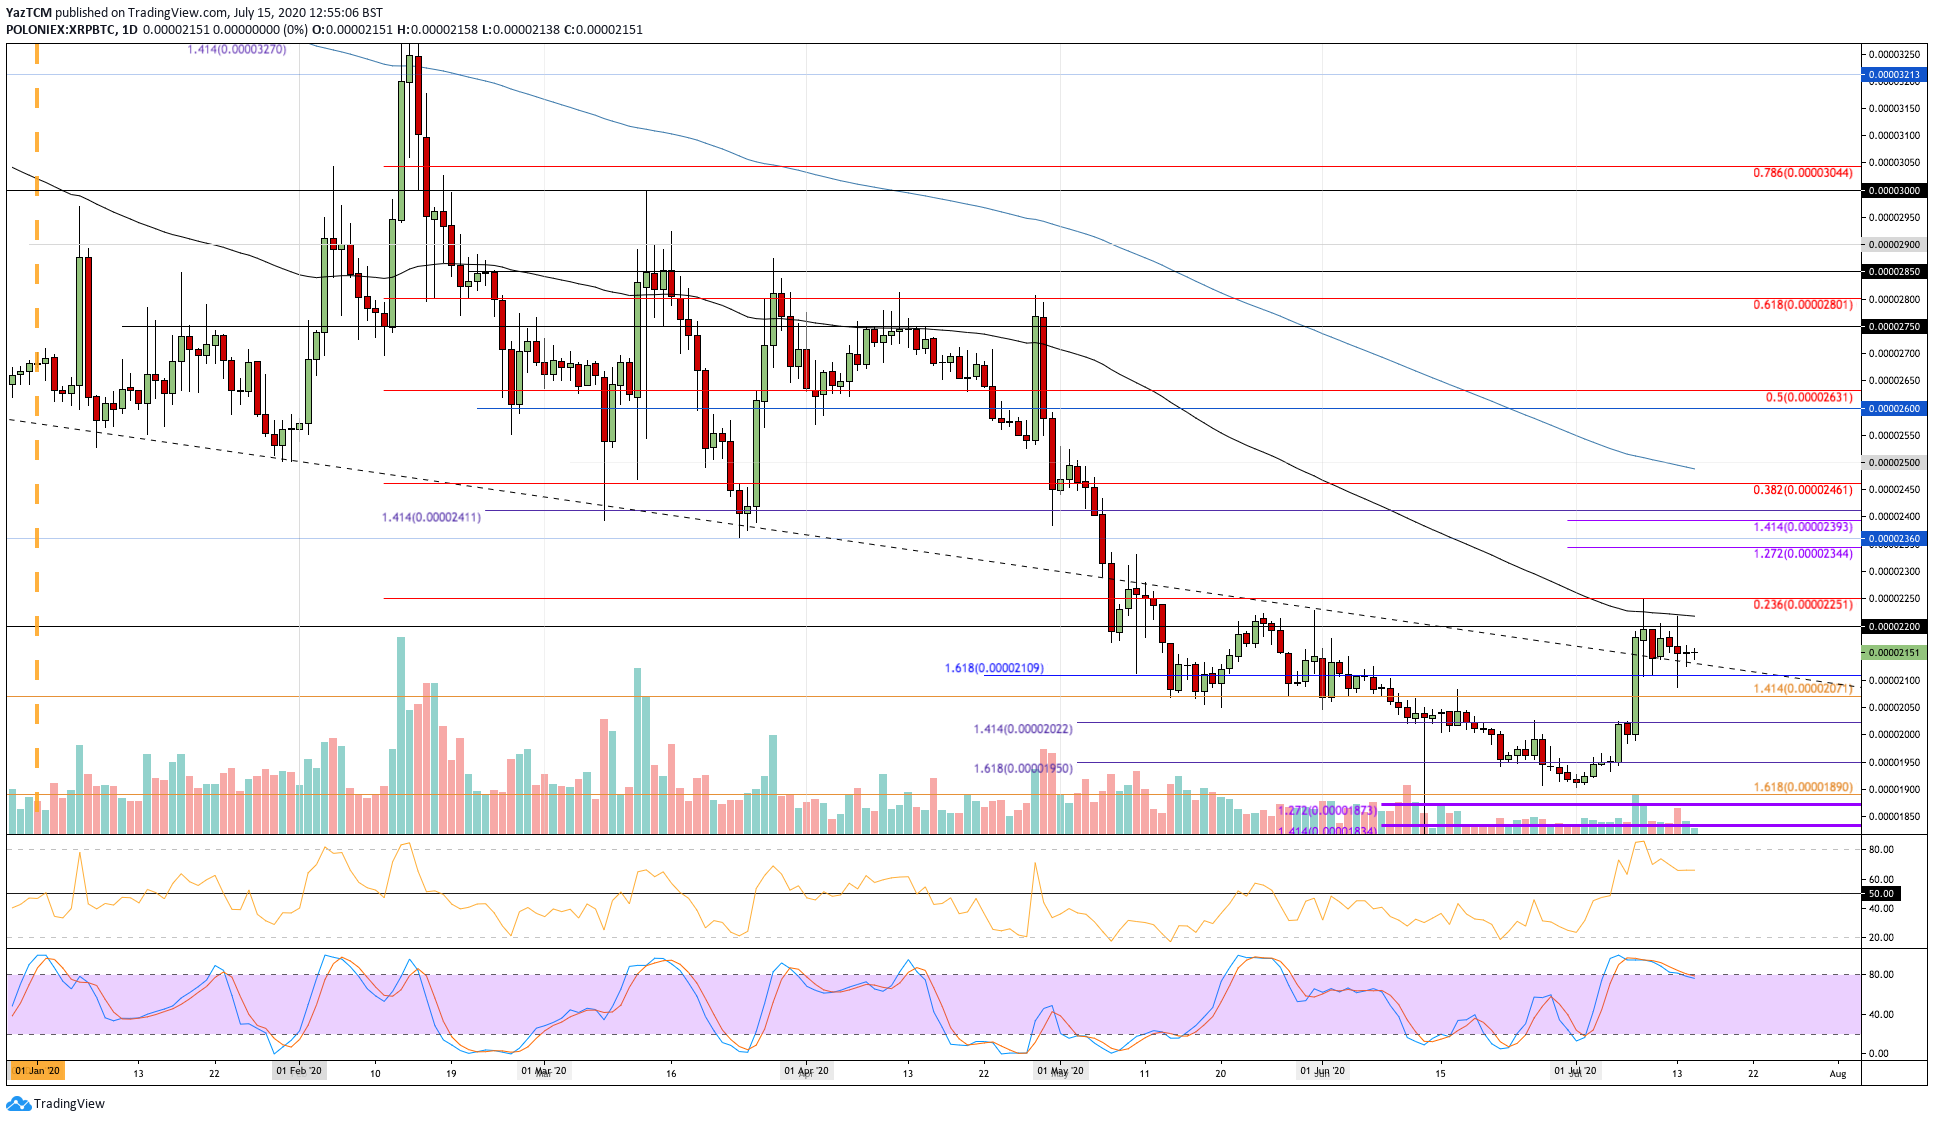 Ripple Price Analysis: When Will XRP Break $0.2 And Join The Altcoin Party?